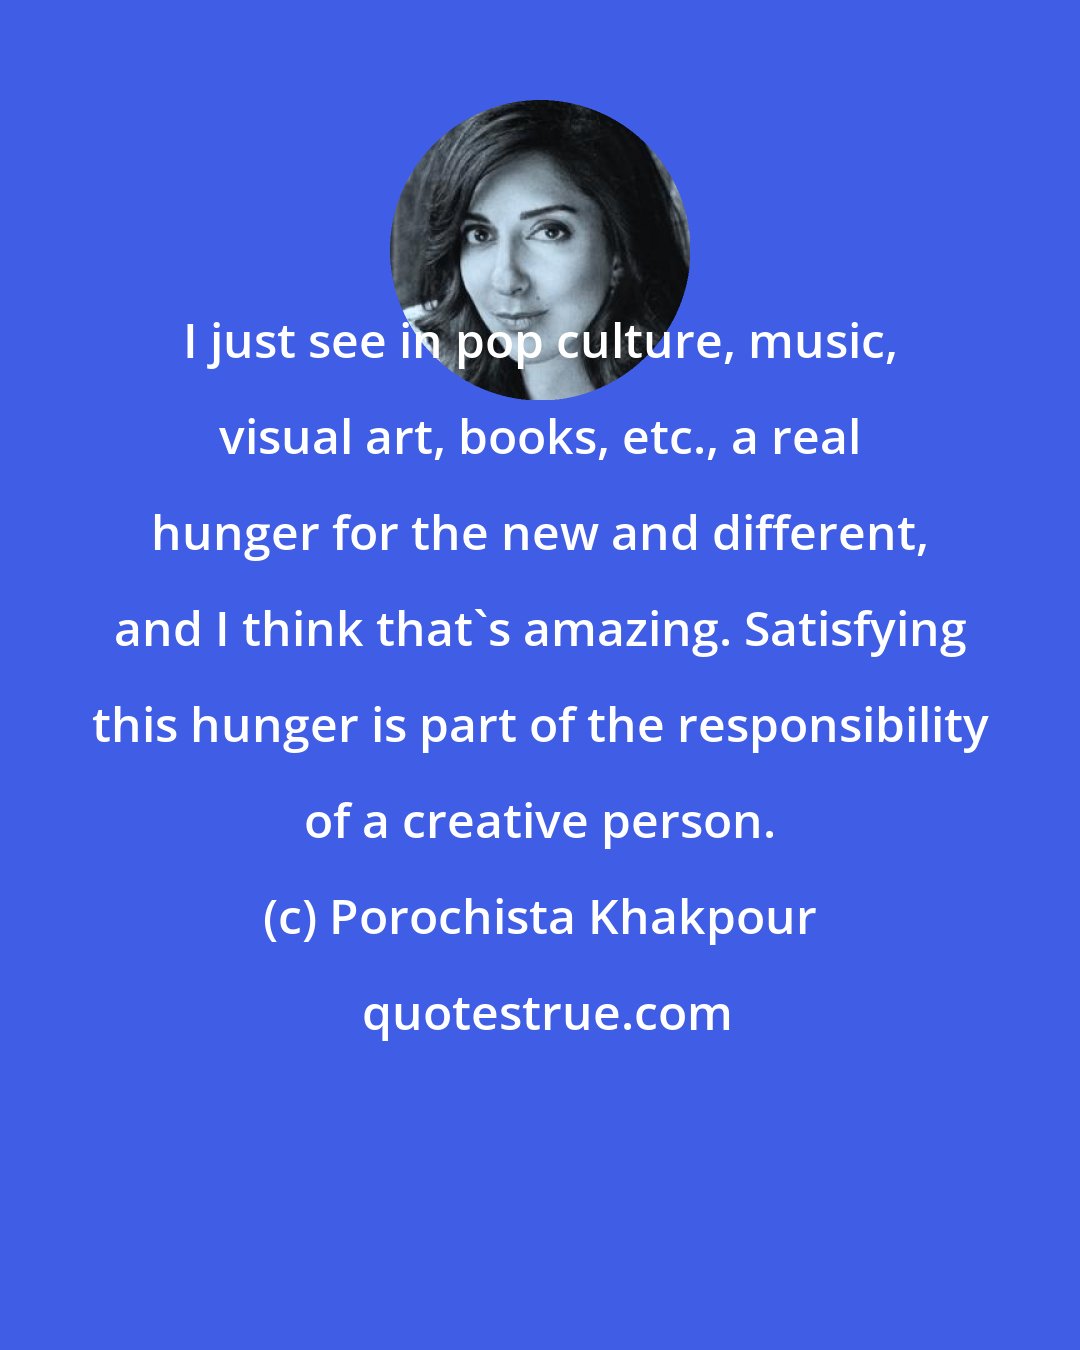 Porochista Khakpour: I just see in pop culture, music, visual art, books, etc., a real hunger for the new and different, and I think that's amazing. Satisfying this hunger is part of the responsibility of a creative person.